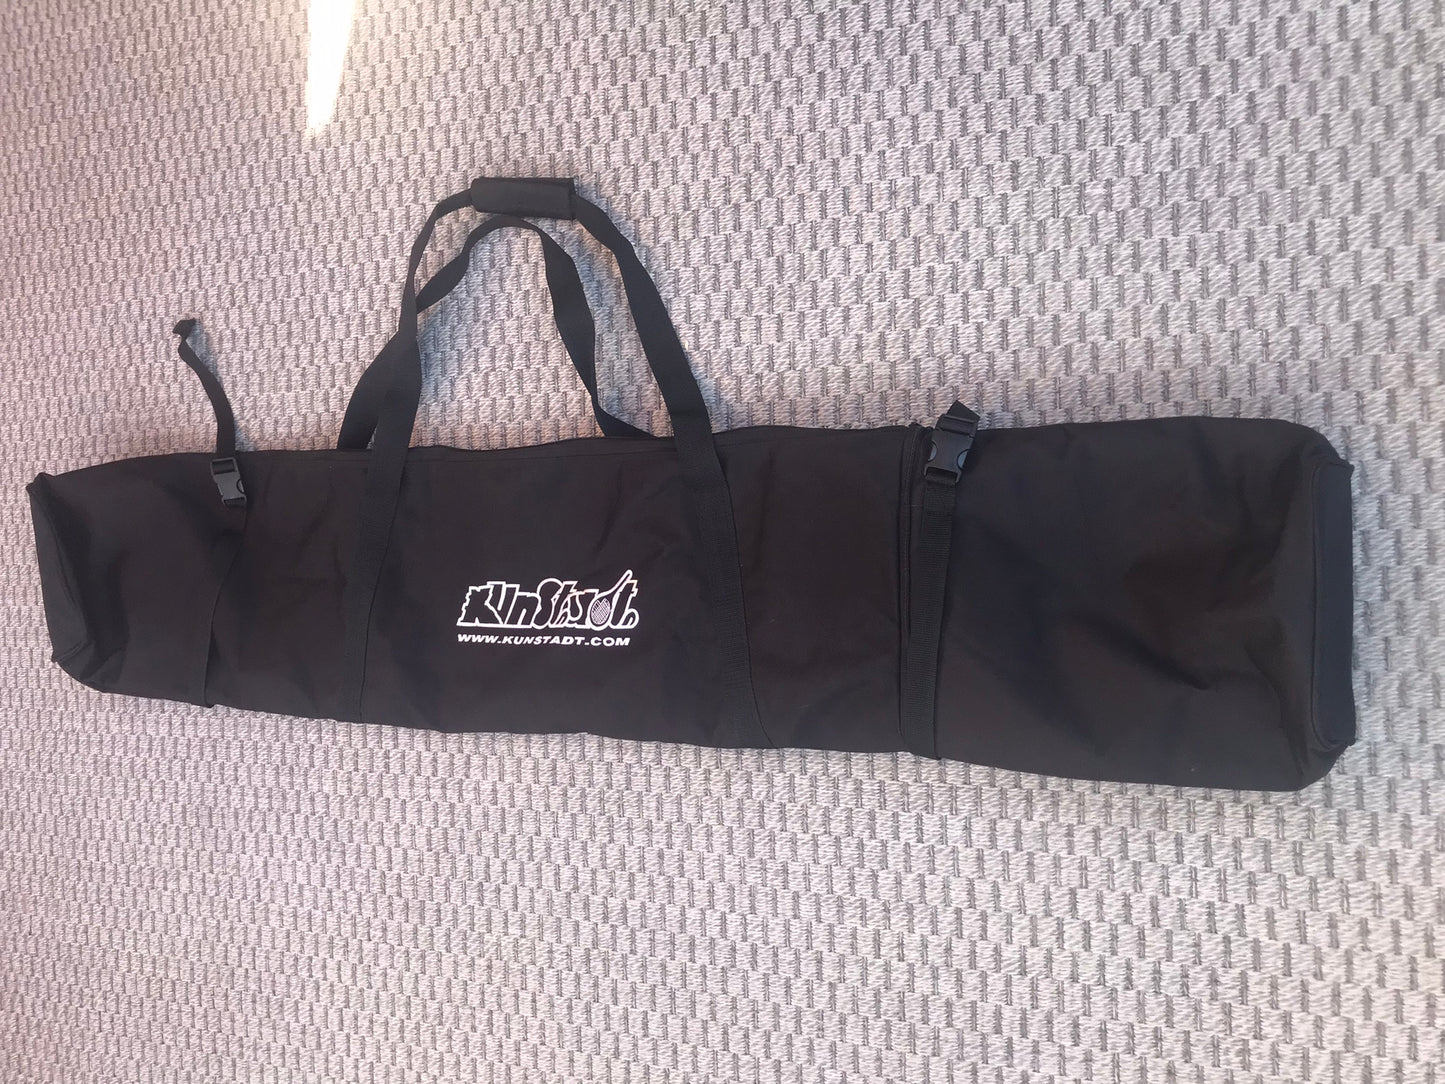 Ski Bag 145 Cm Kunstadt Child Size Black Like New Heavy Duty Thick and Well Made Like New